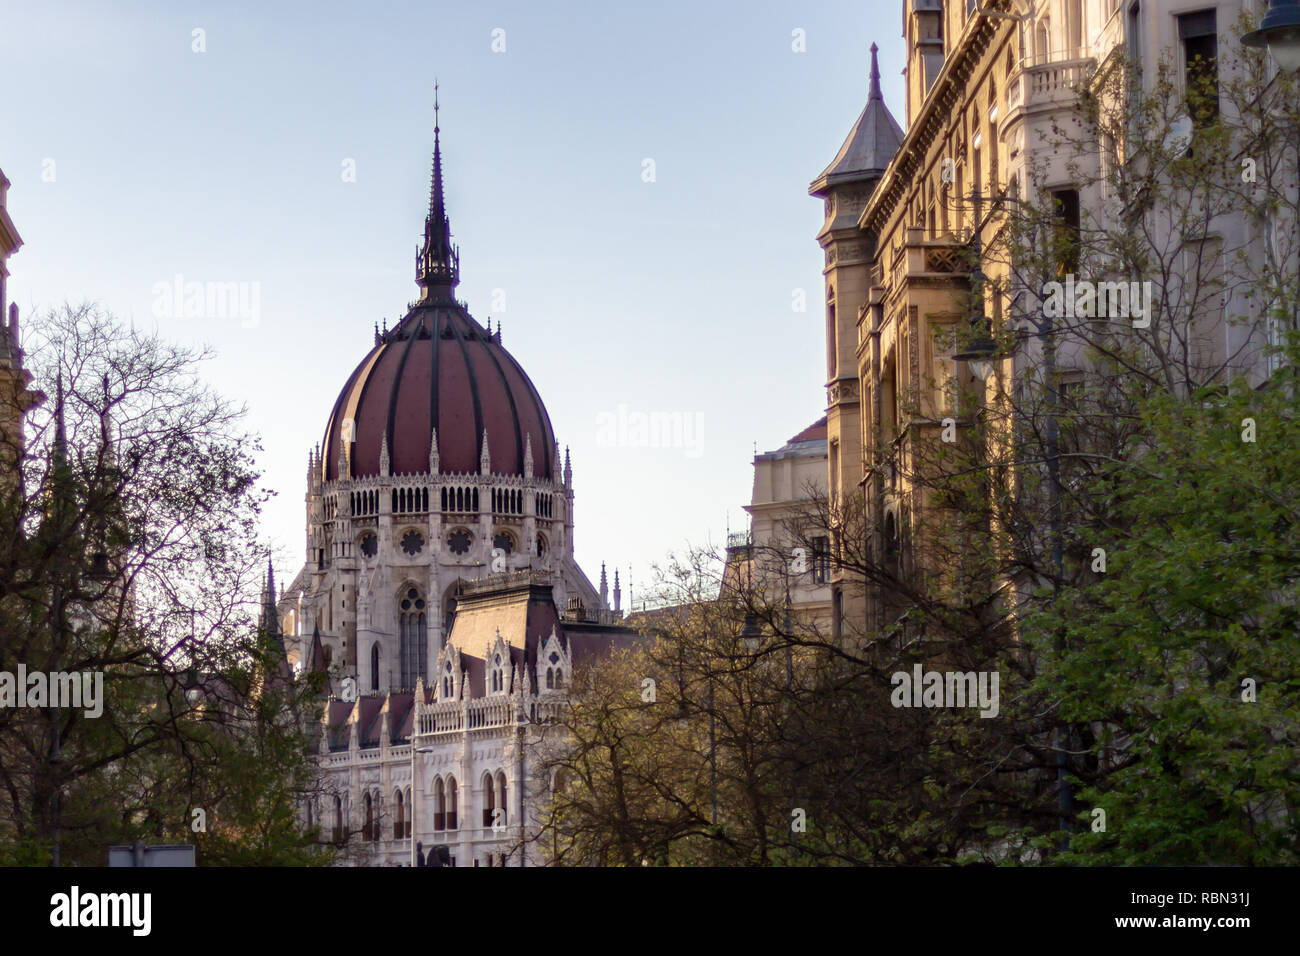 The dome of the Hungarian Parliament Building as seen from a Budapest city street Stock Photo